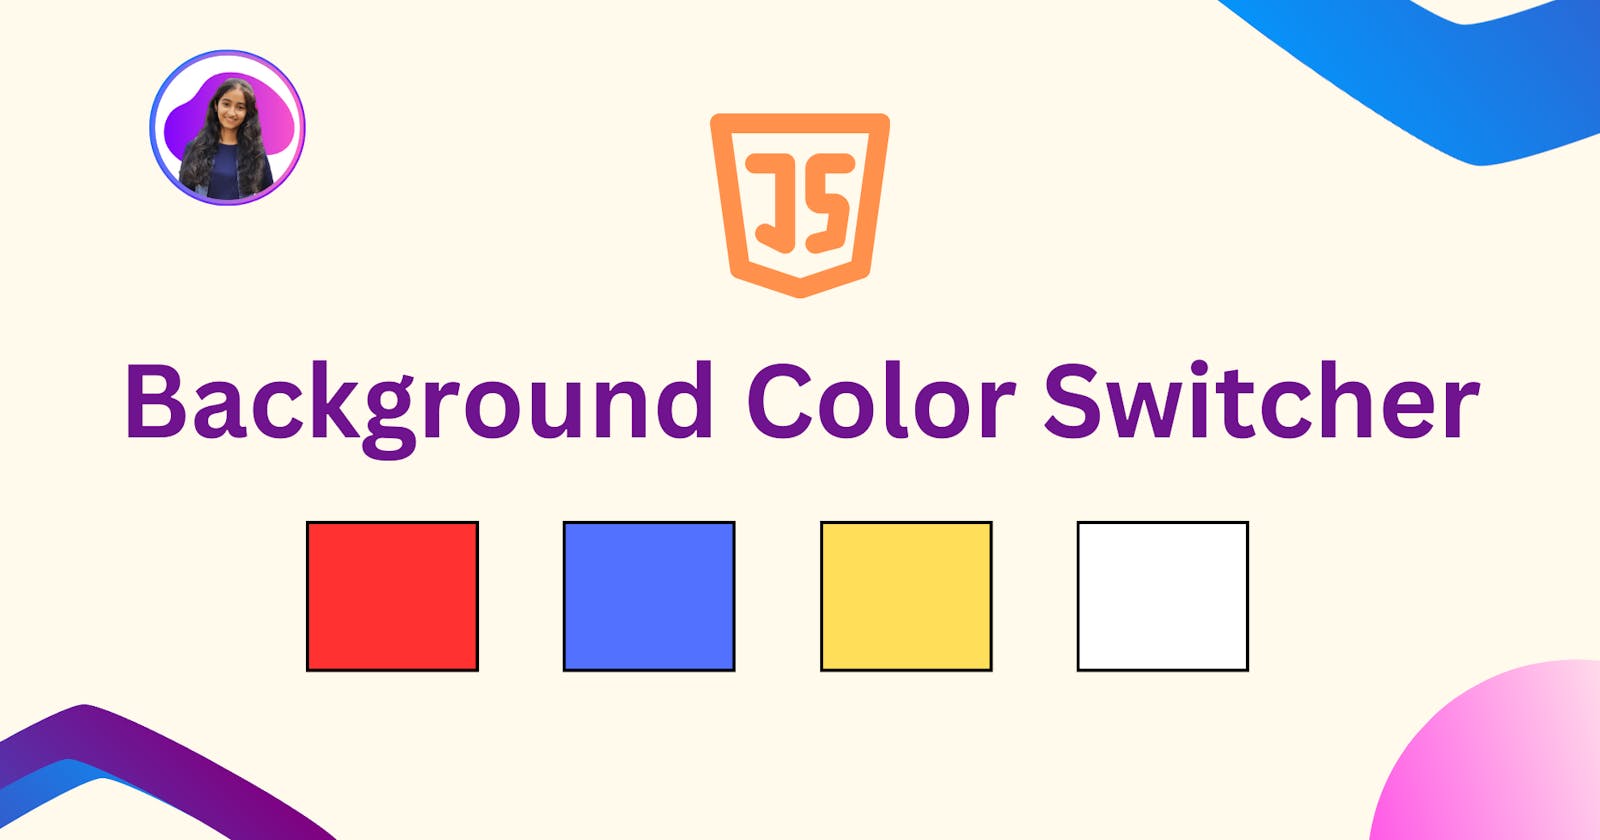 How To Make A Background Color Switcher Project Using JavaScript?